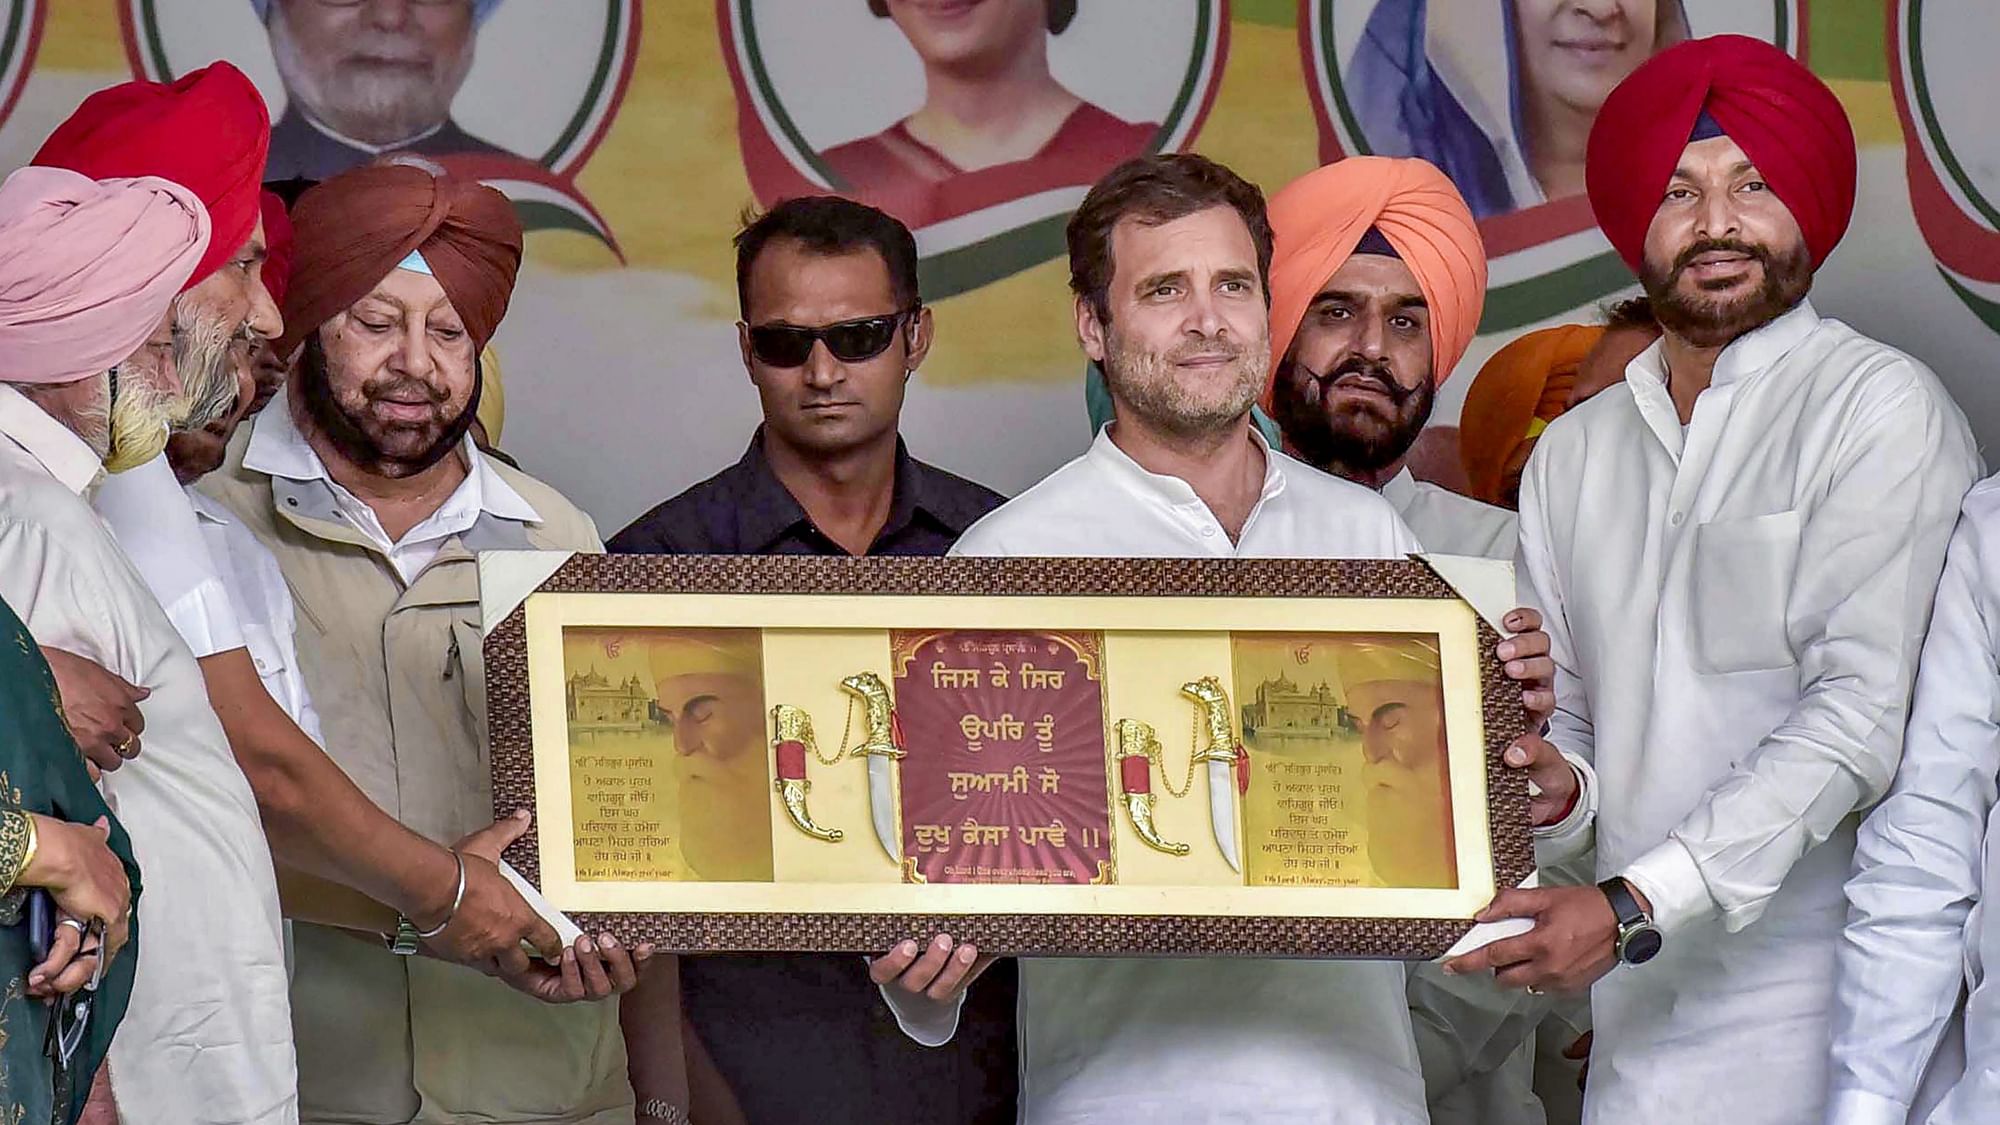 Congress President Rahul Gandhi being presented with a memento during an election rally in Ludhiana.